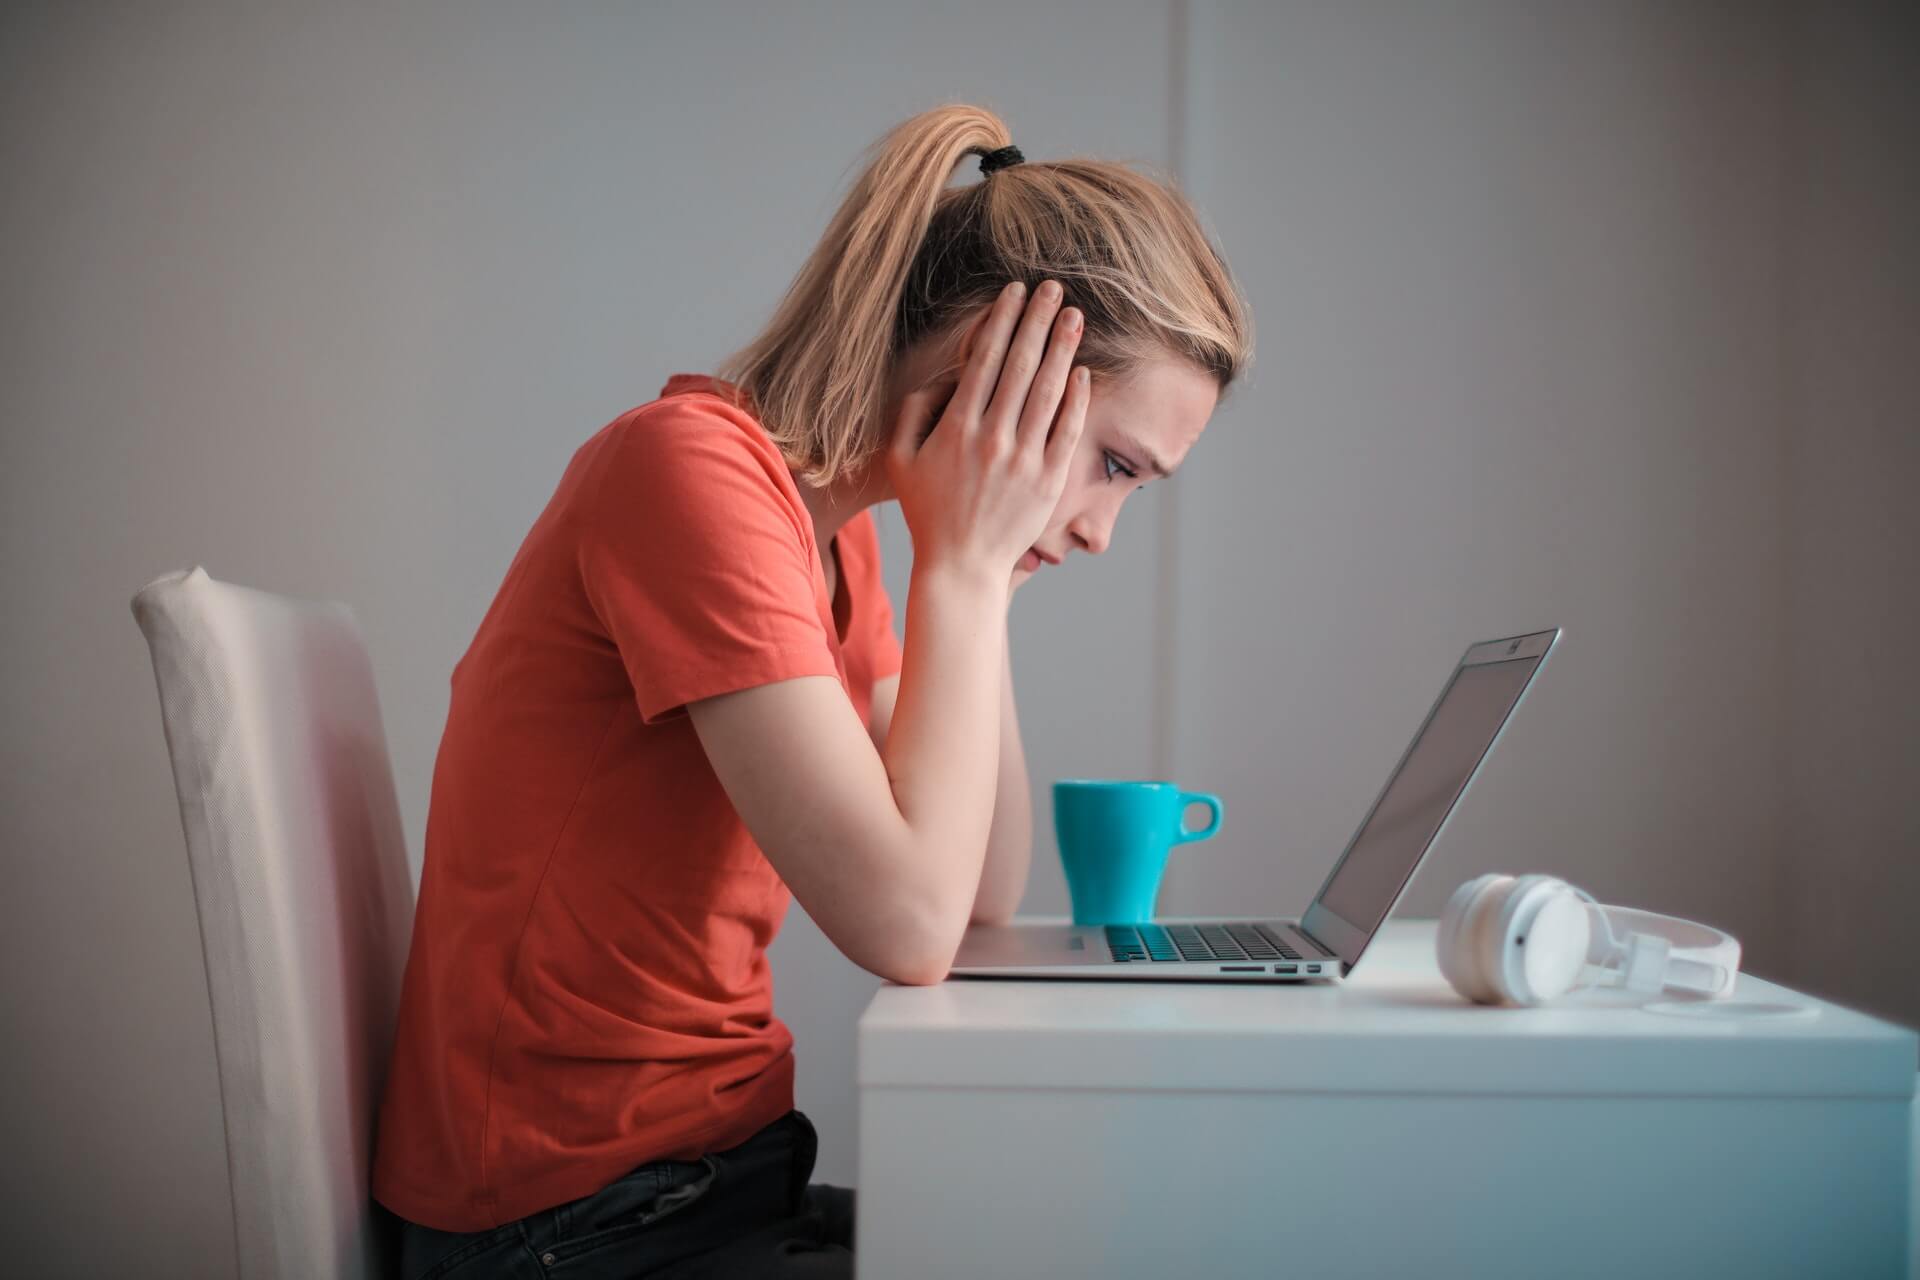 Unsatisified female employee looks sadly at computer